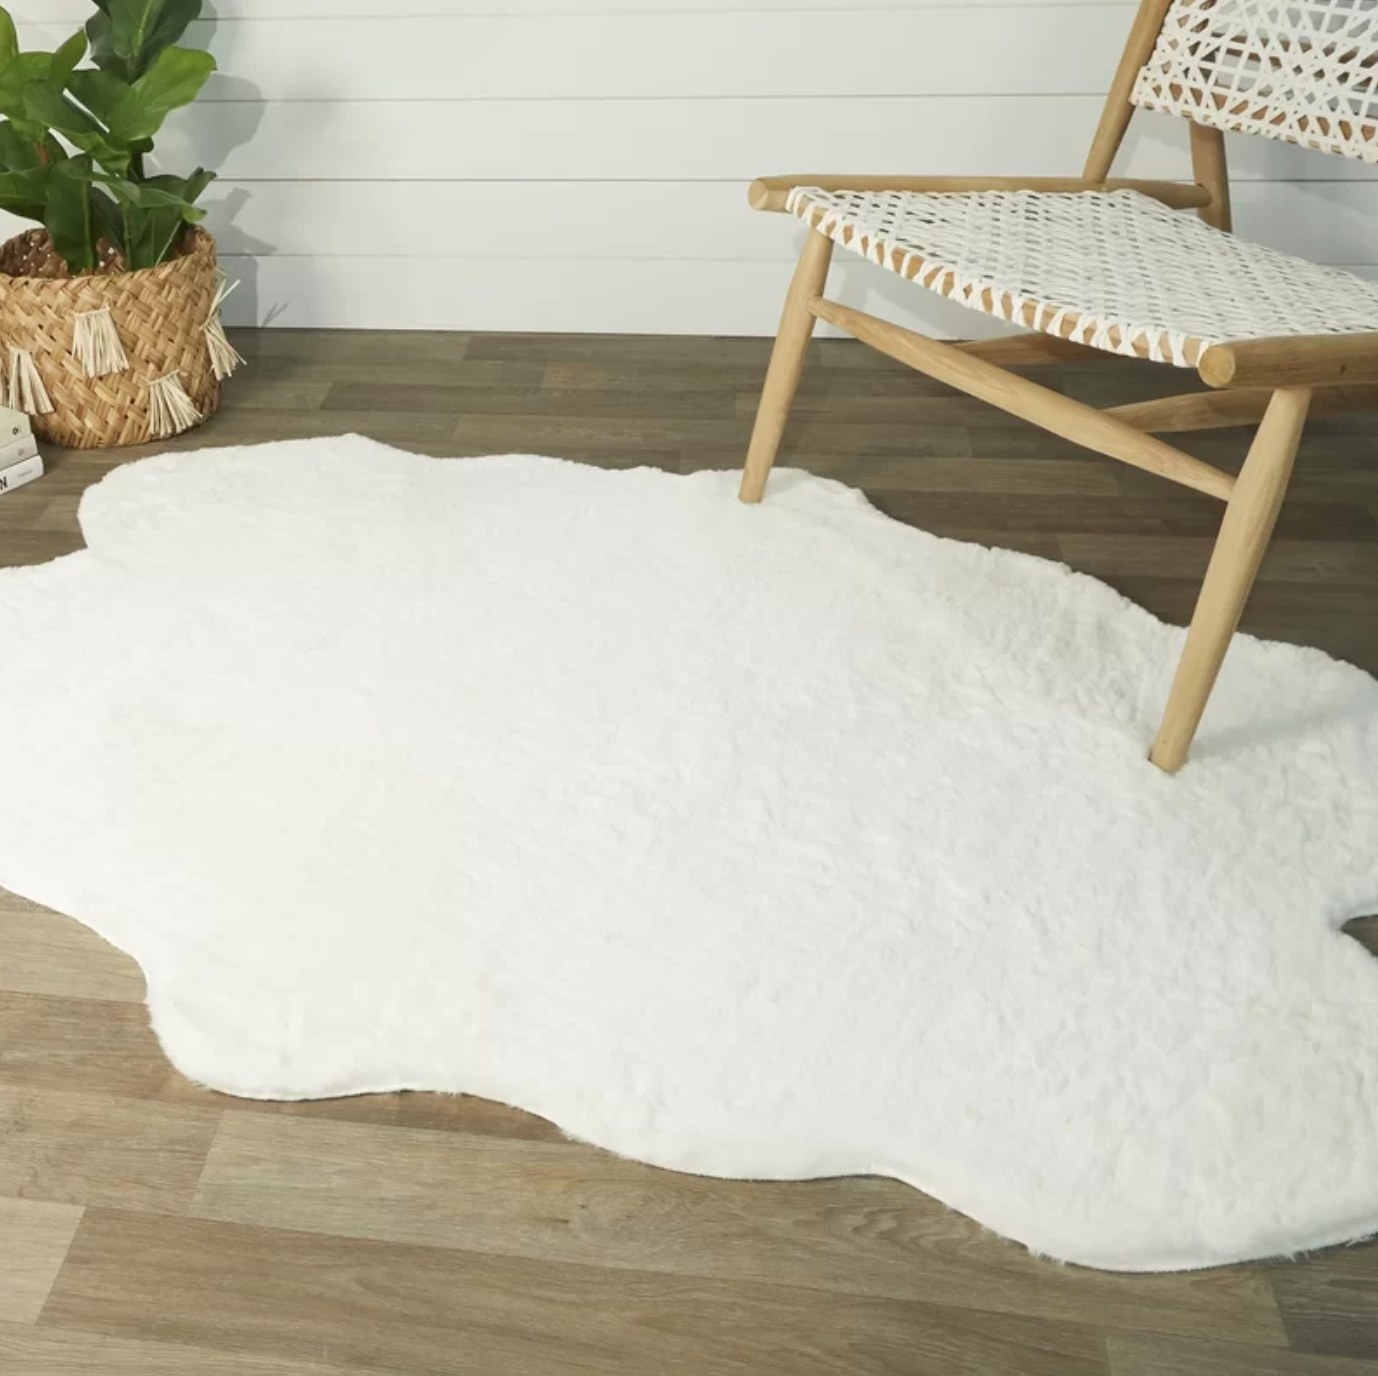 The shaggy faux sheepskin area rug in pure white